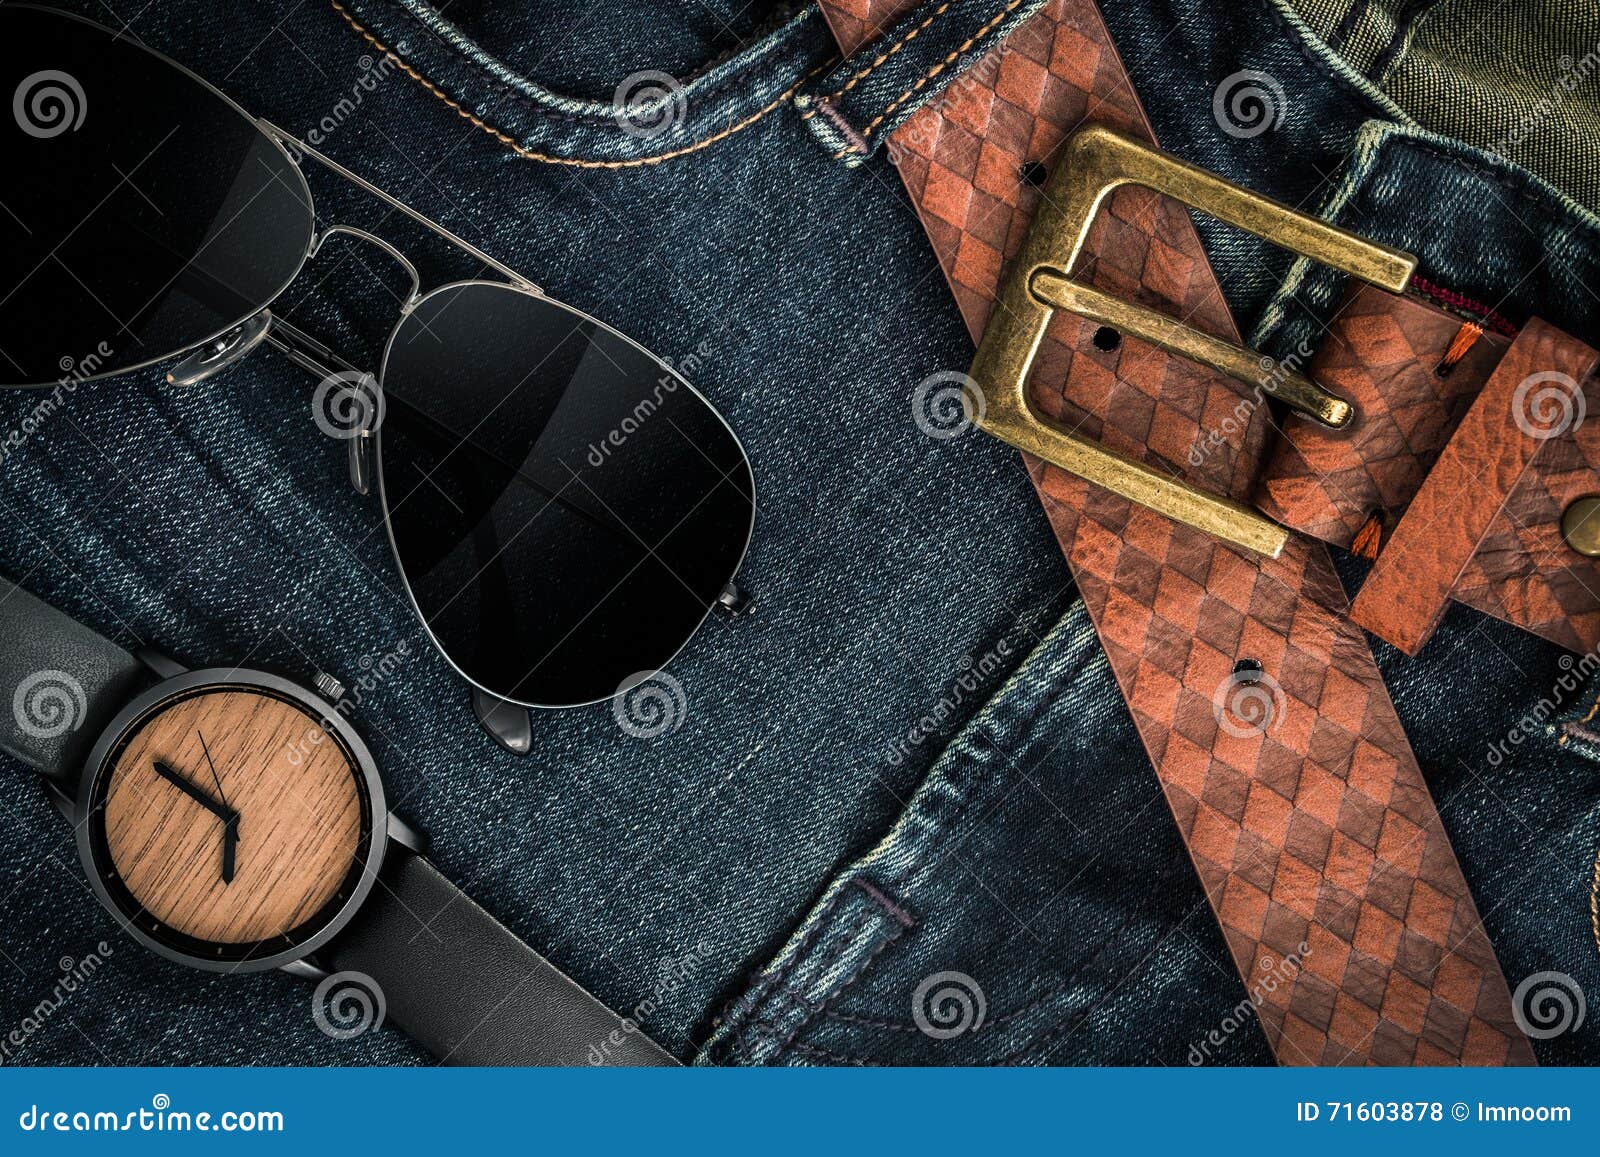 various fashions of sunglasses, wrist watches and belt